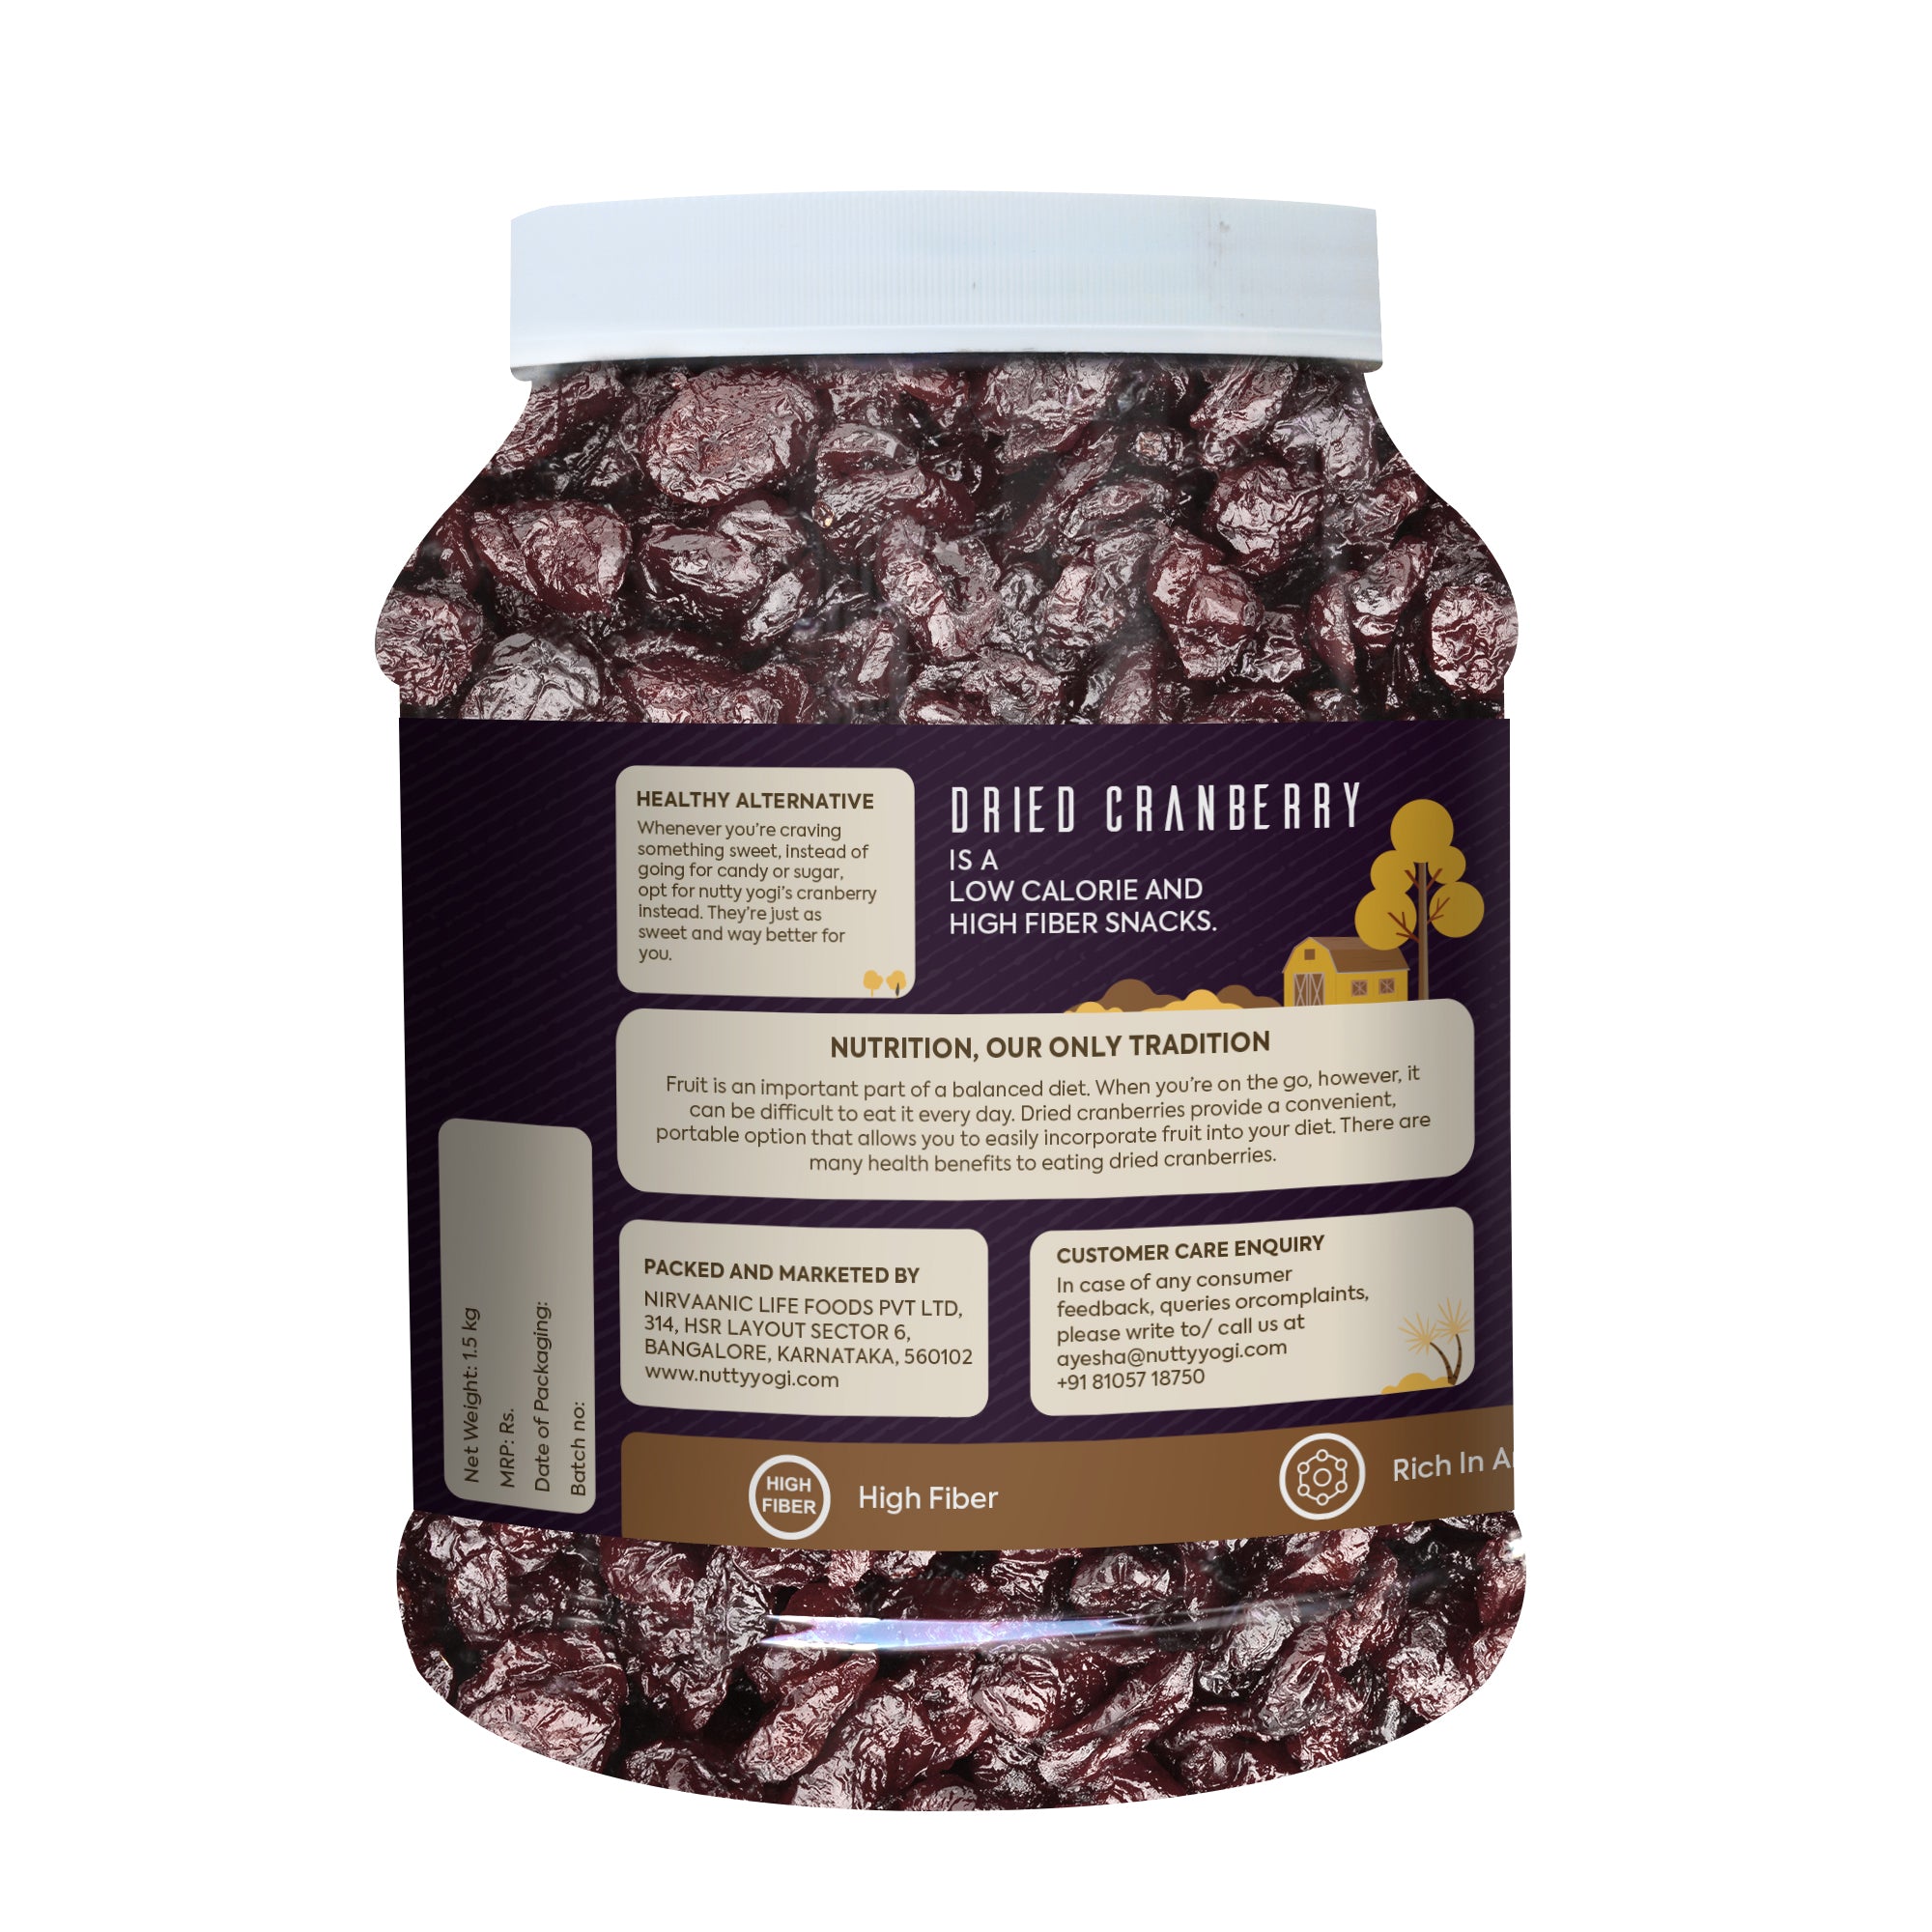 Nutty Yogi Cranberry 1.5kgs jar | Cranberry, Healthy Snack for kids and adults | High Nutrient and Antioxidant